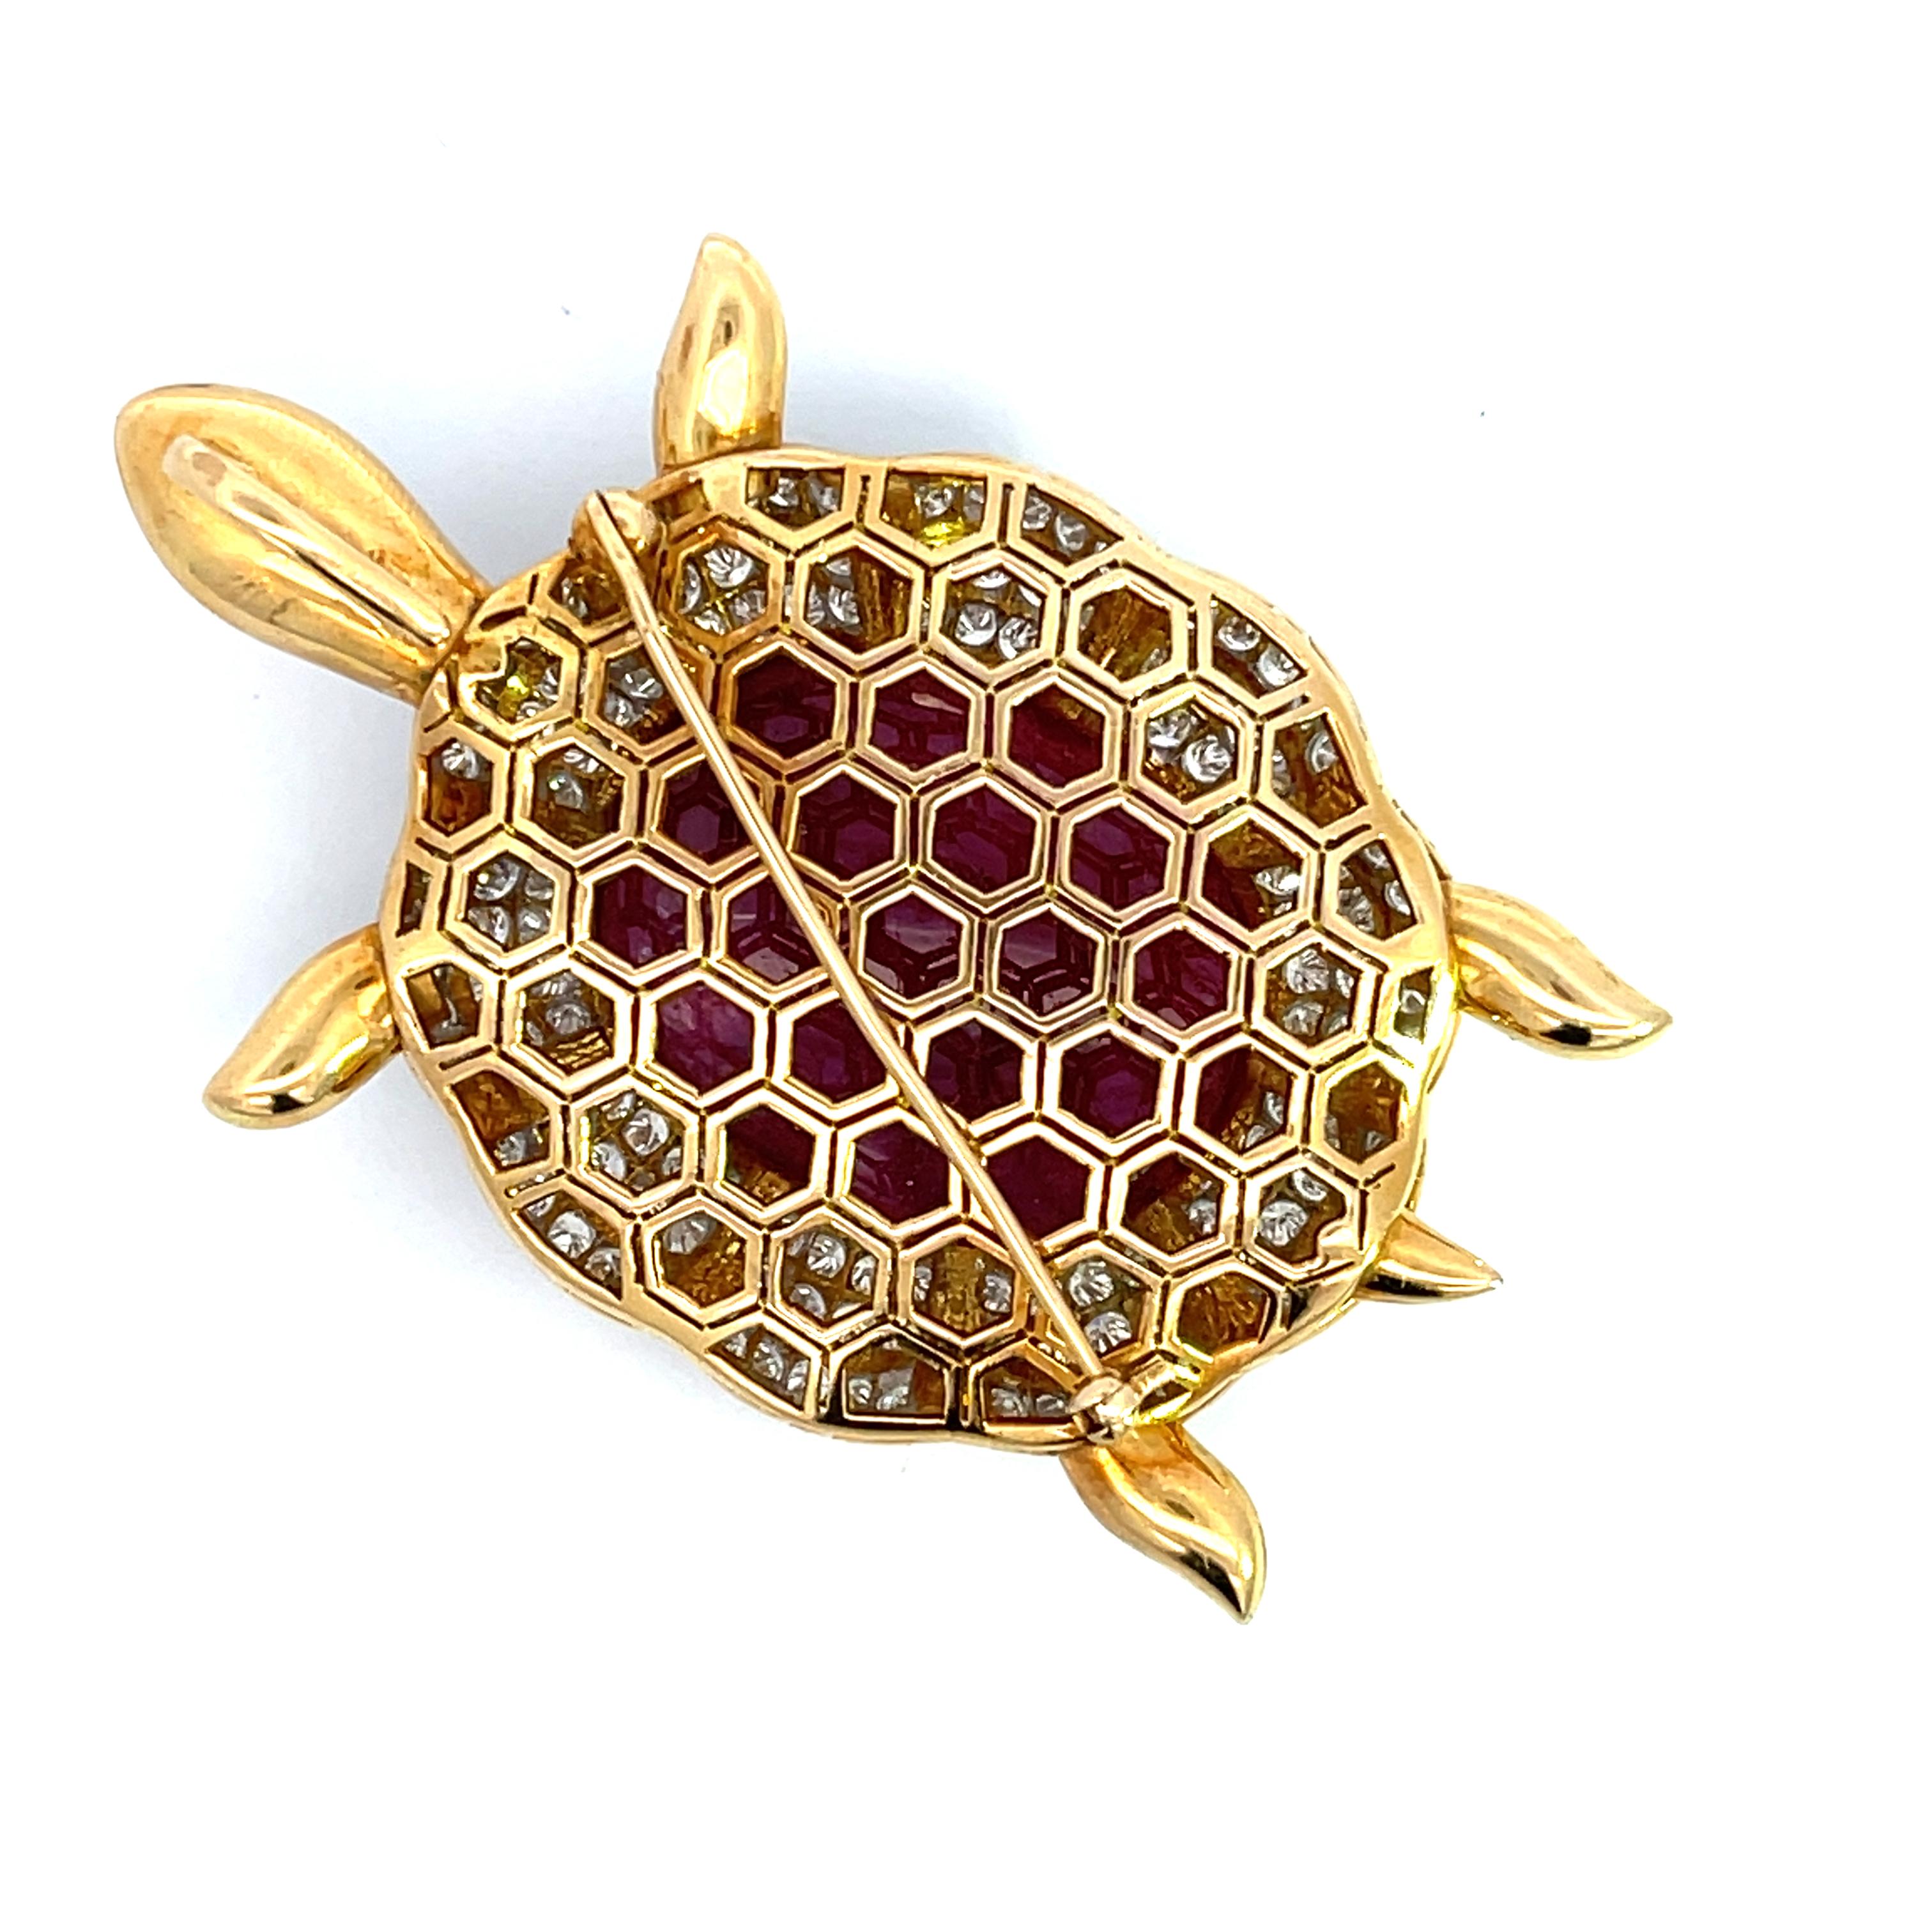 Introducing our exquisite 18K Yellow Gold 6.12ctw Diamond and 44/1ctw Natural cat's Eye Ruby Pendant/Brooch, a dazzling addition to your jewelry collection. An Impressive piece of jewelry, covered with diamonds will definitely make a statement. Made